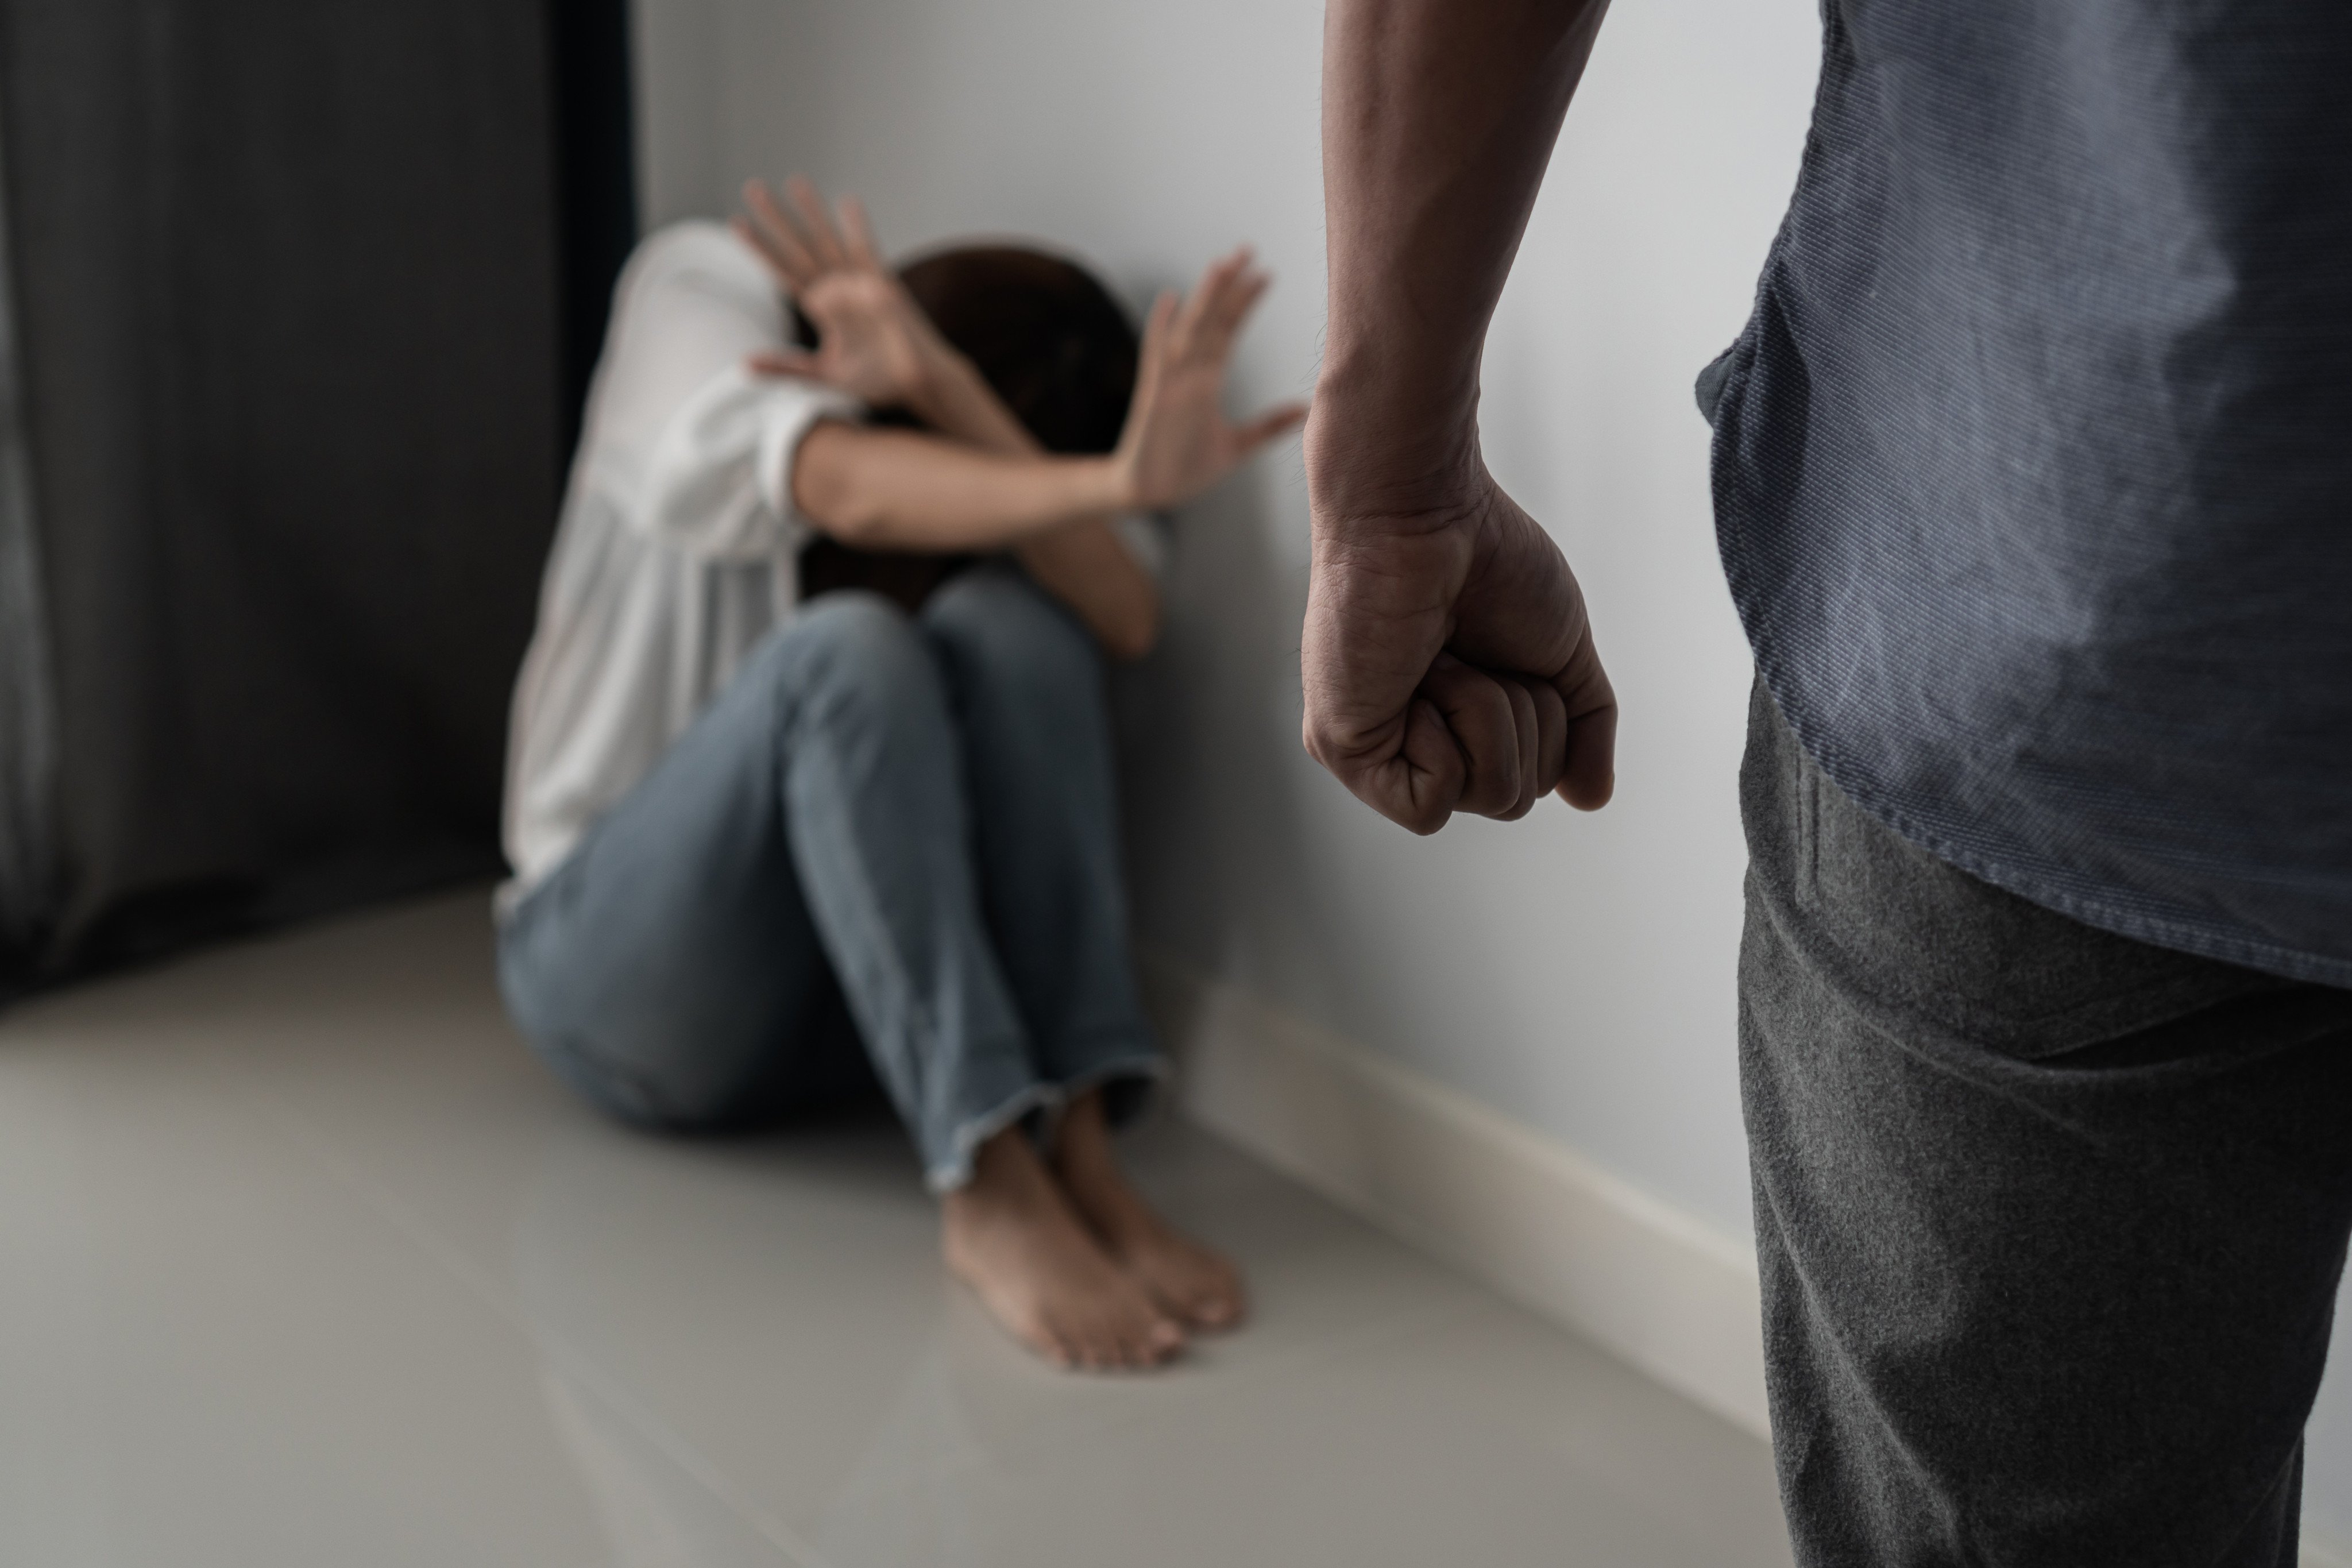 Domestic violence is being treated as a threat to social order, according to analysts. Photo: Shutterstock 